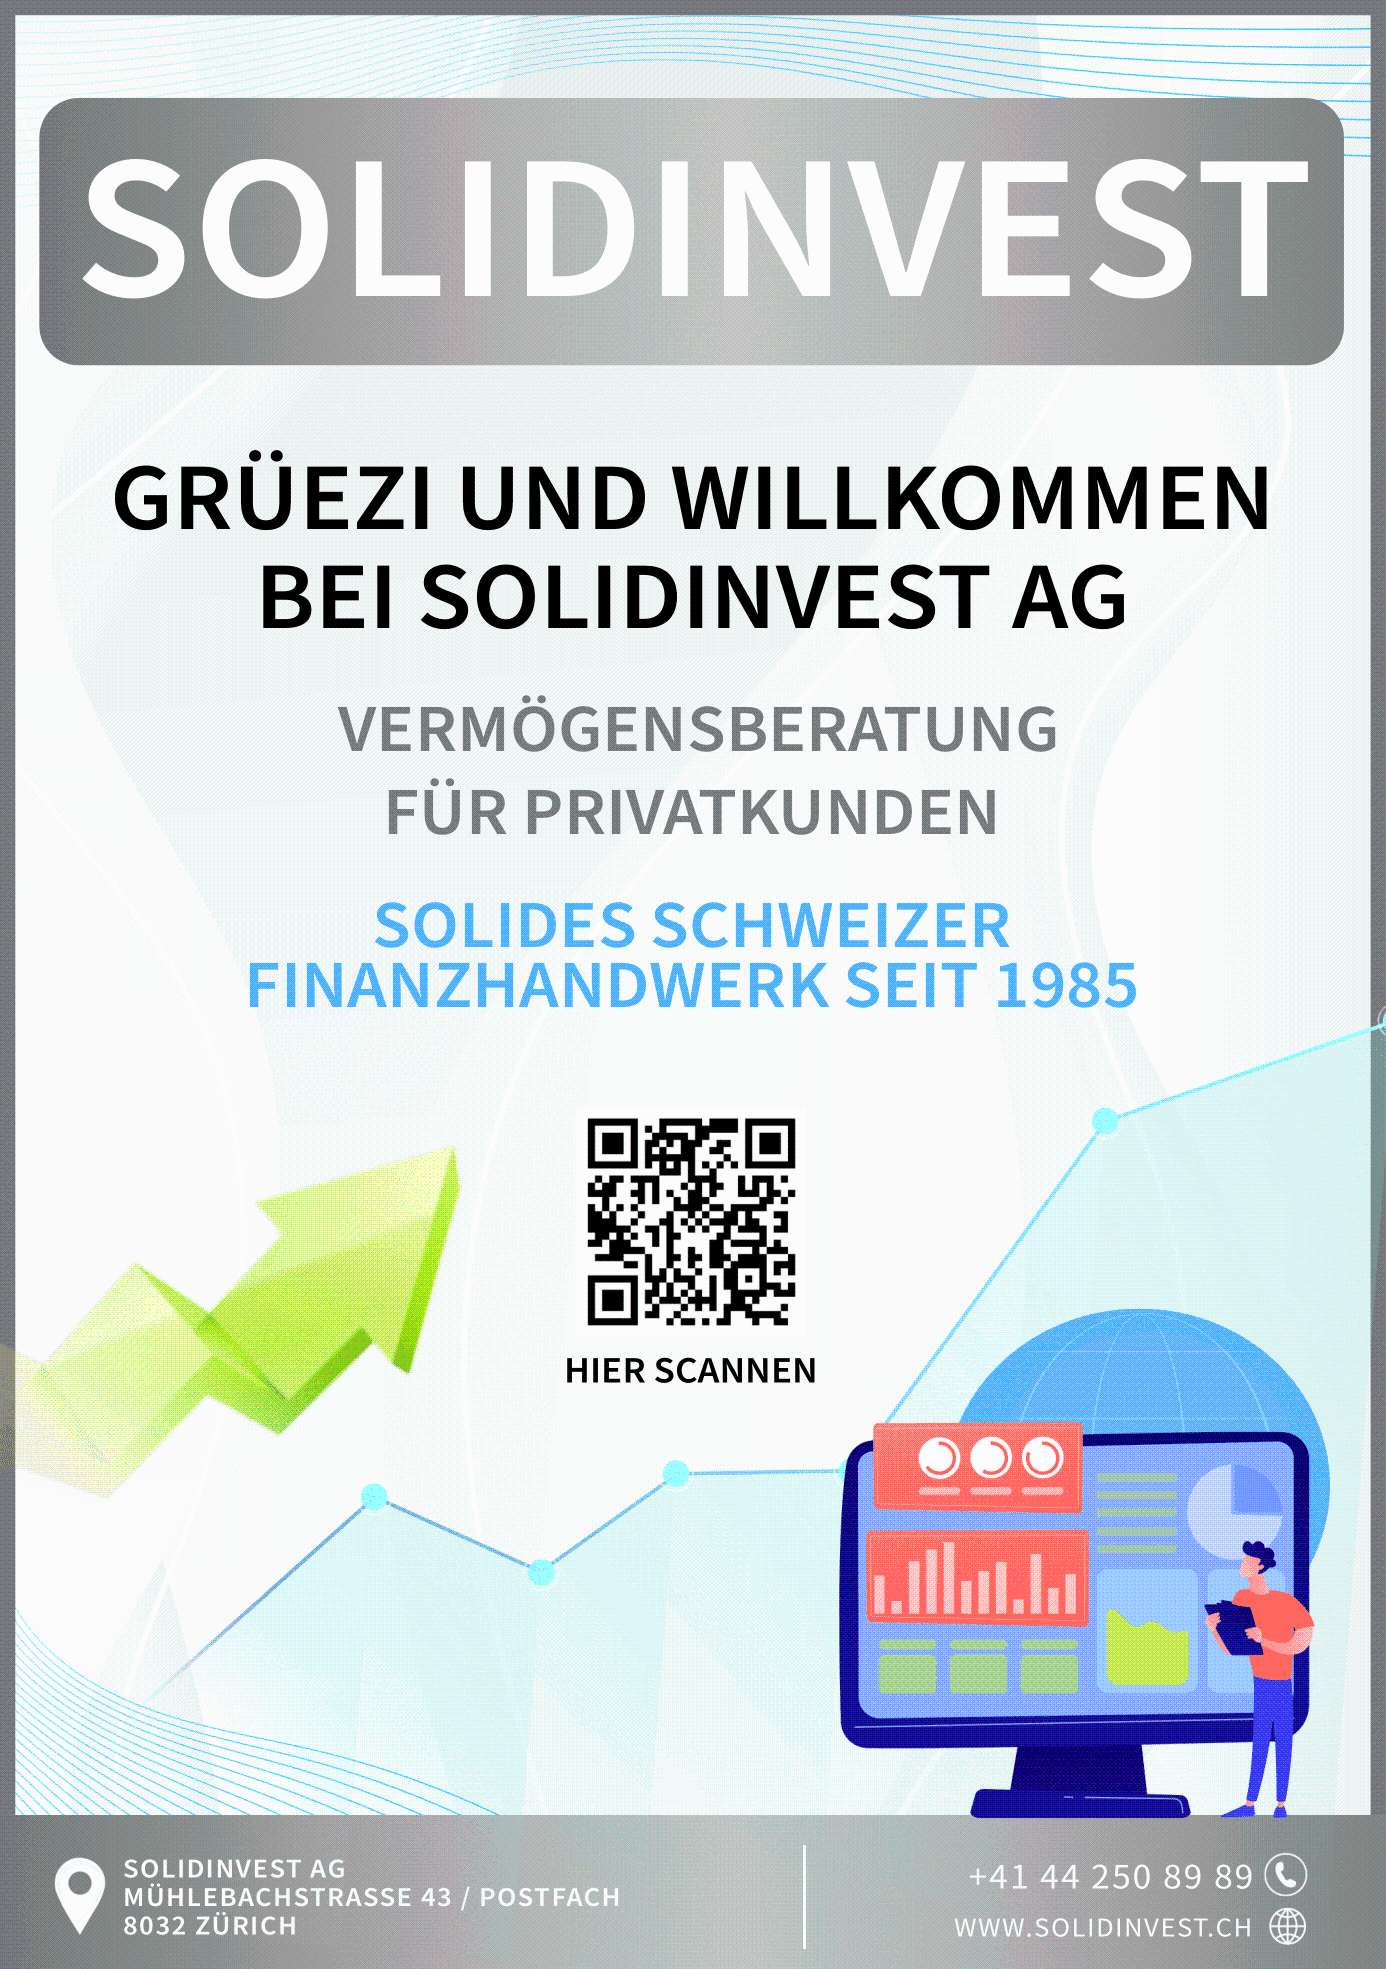 Solidinvest AG